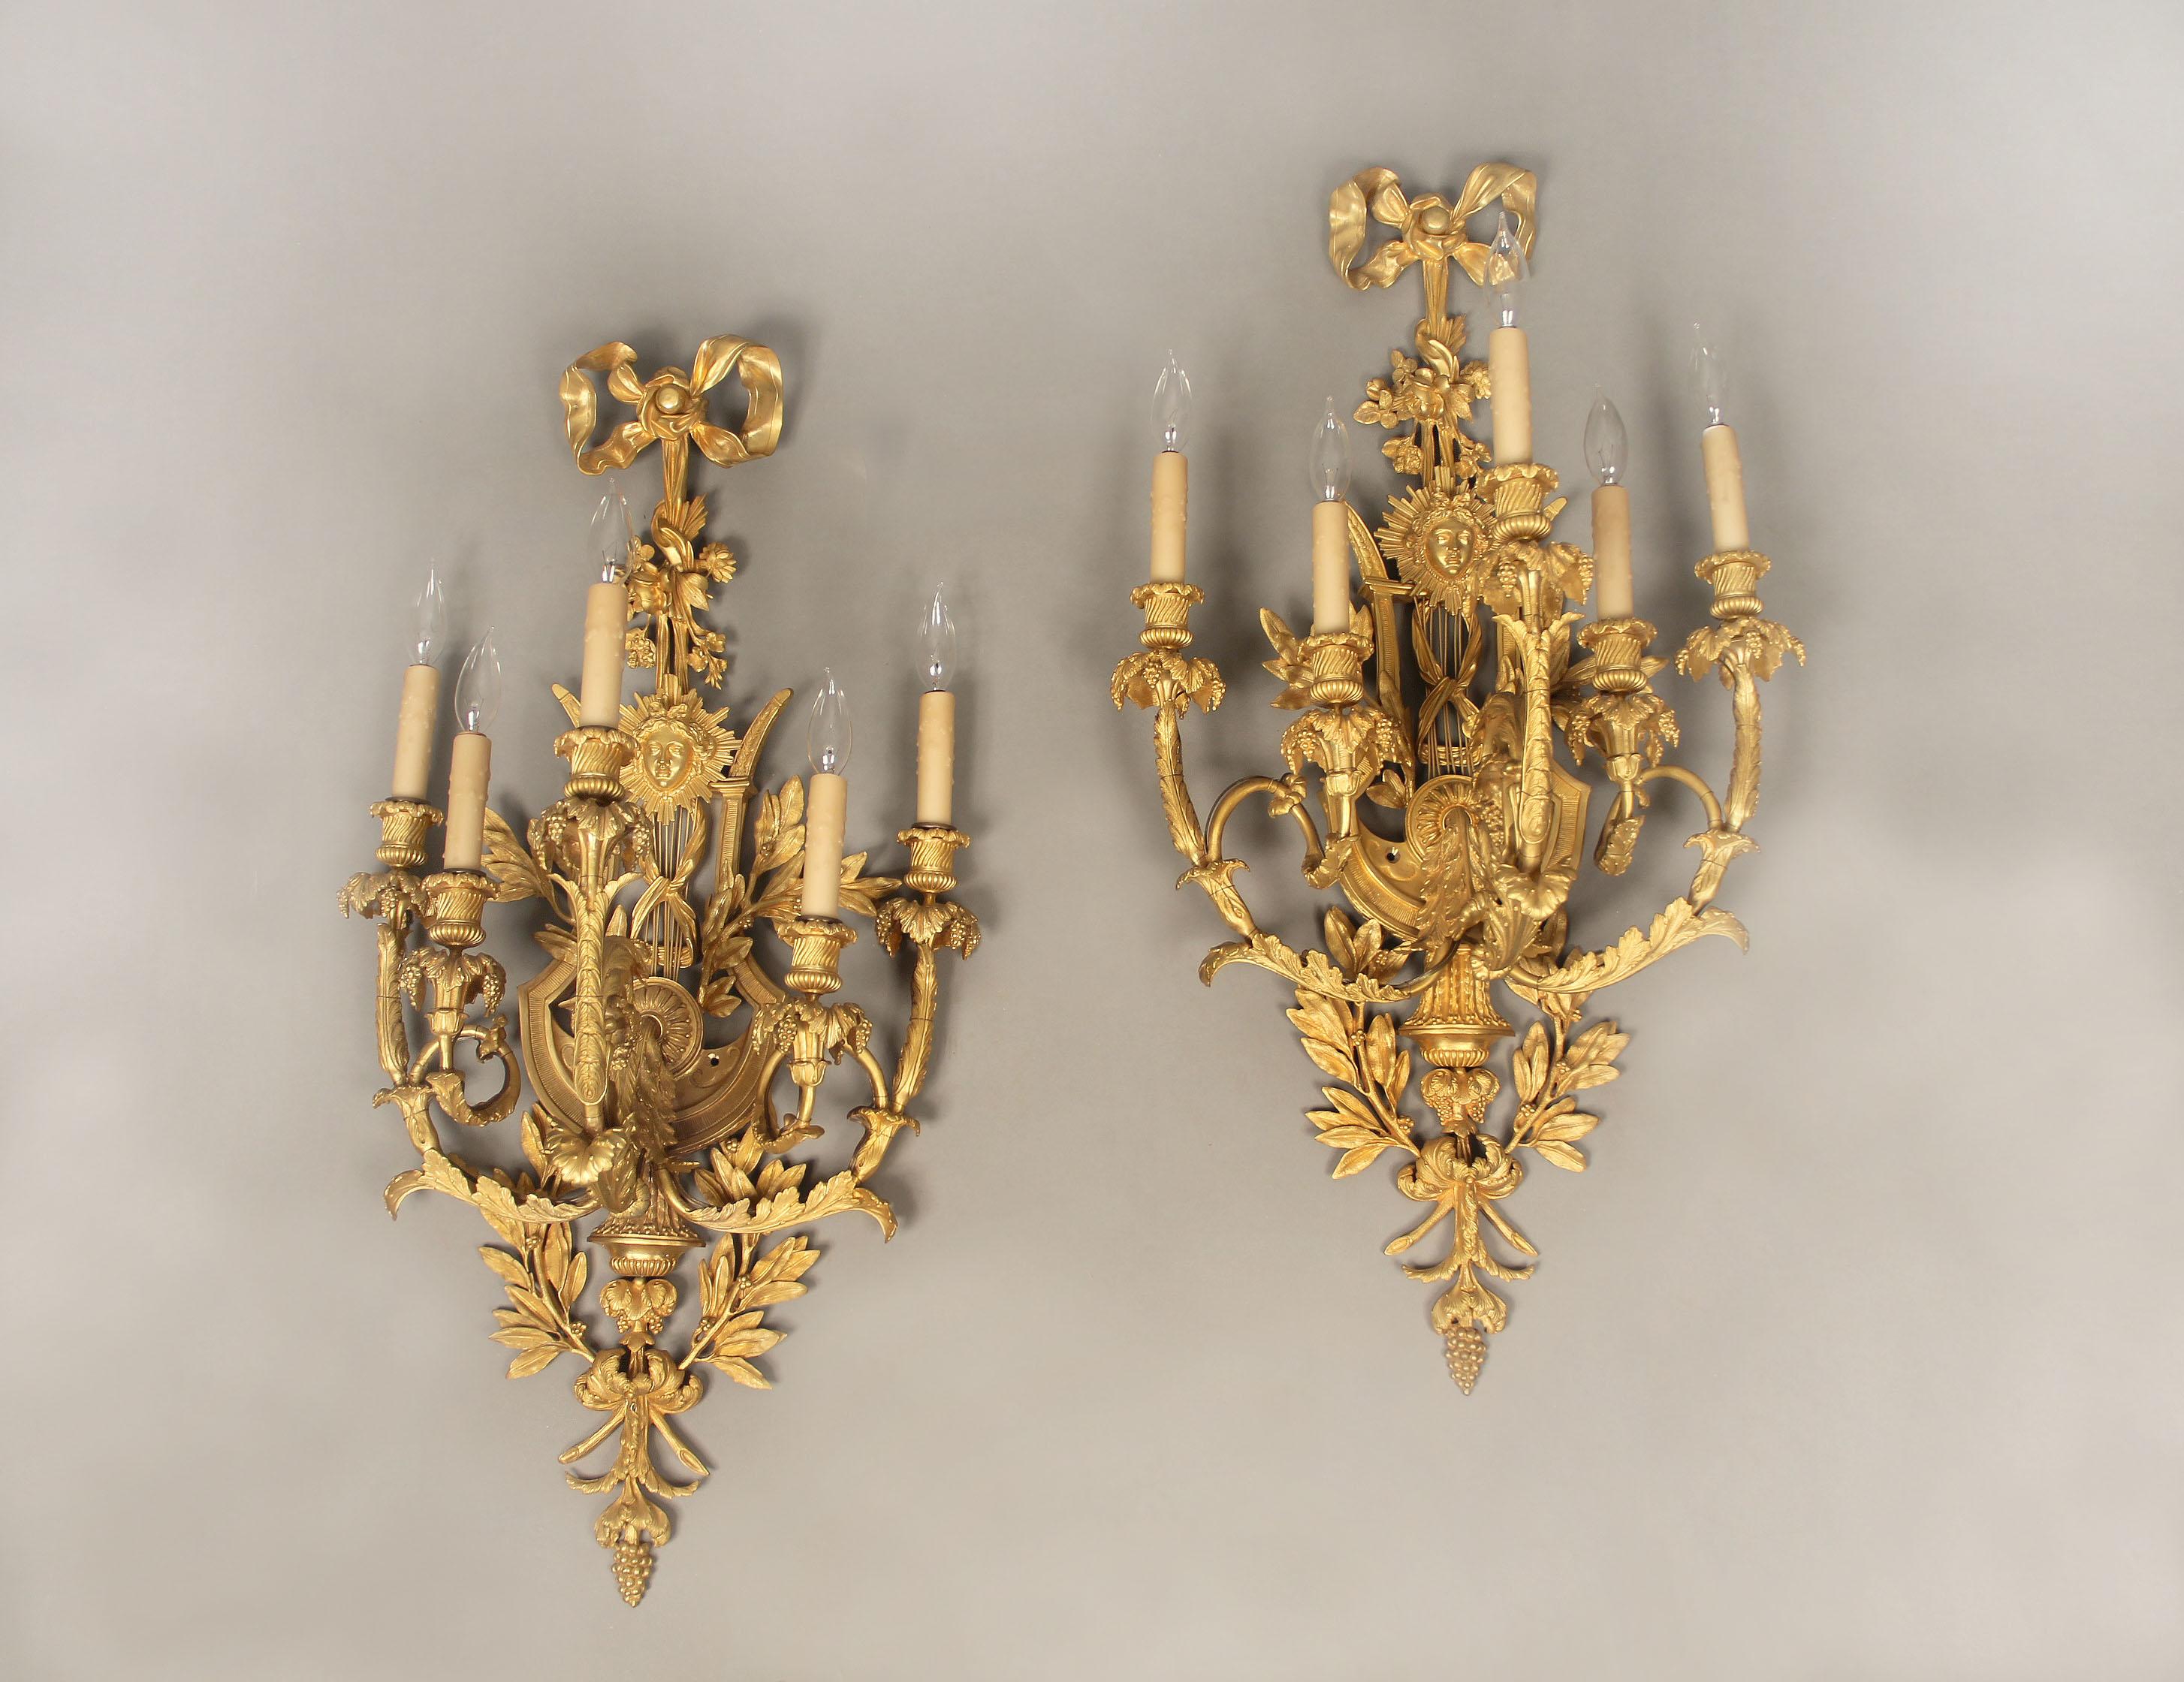 A large and elaborate pair of early 20th century gilt bronze five-light sconces

Each backplate shaped as a lyre, centered with a mask of Apollo, the top with a bow knotted ribbon, the arms and base decorated with leaves and berries.